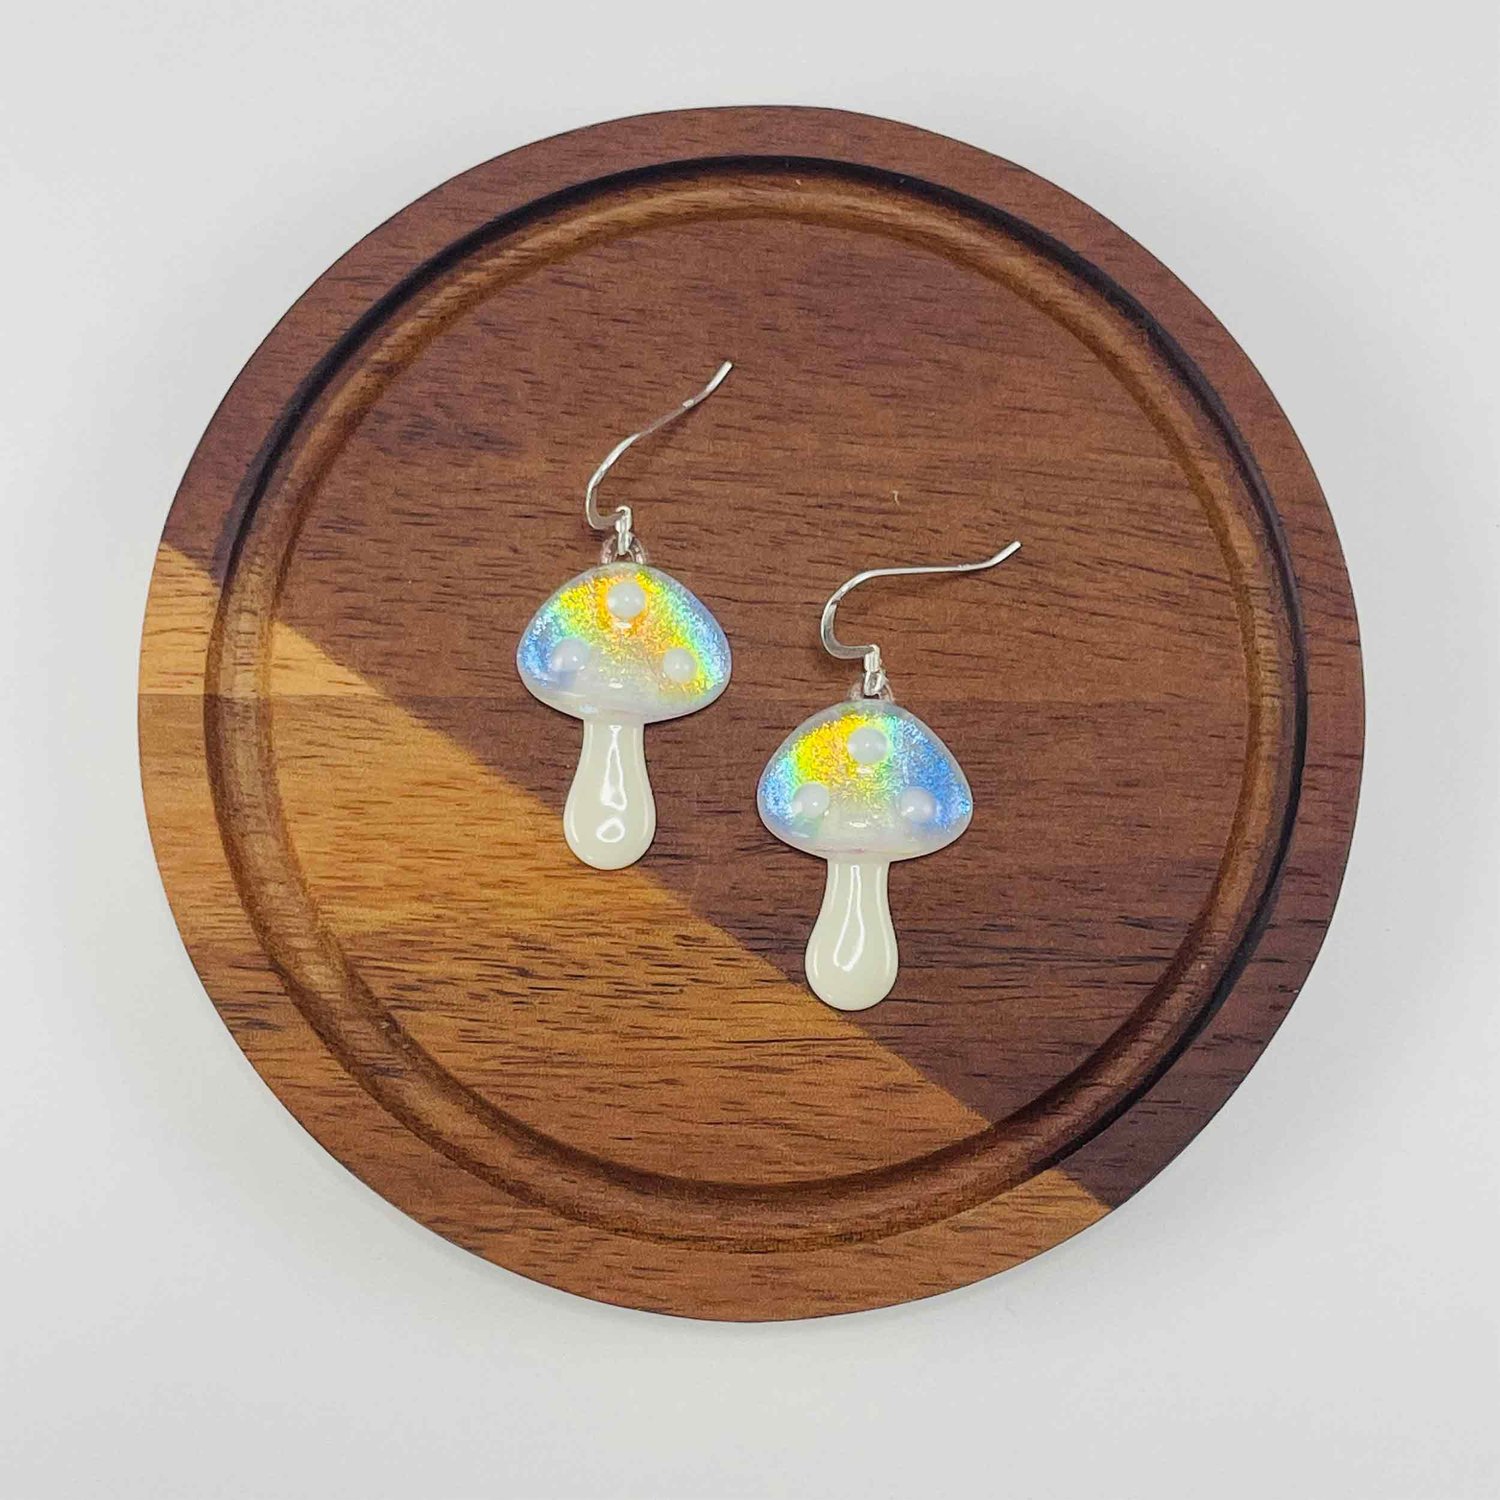 Teardrop Stained Glass Earrings - Clear Iridescent